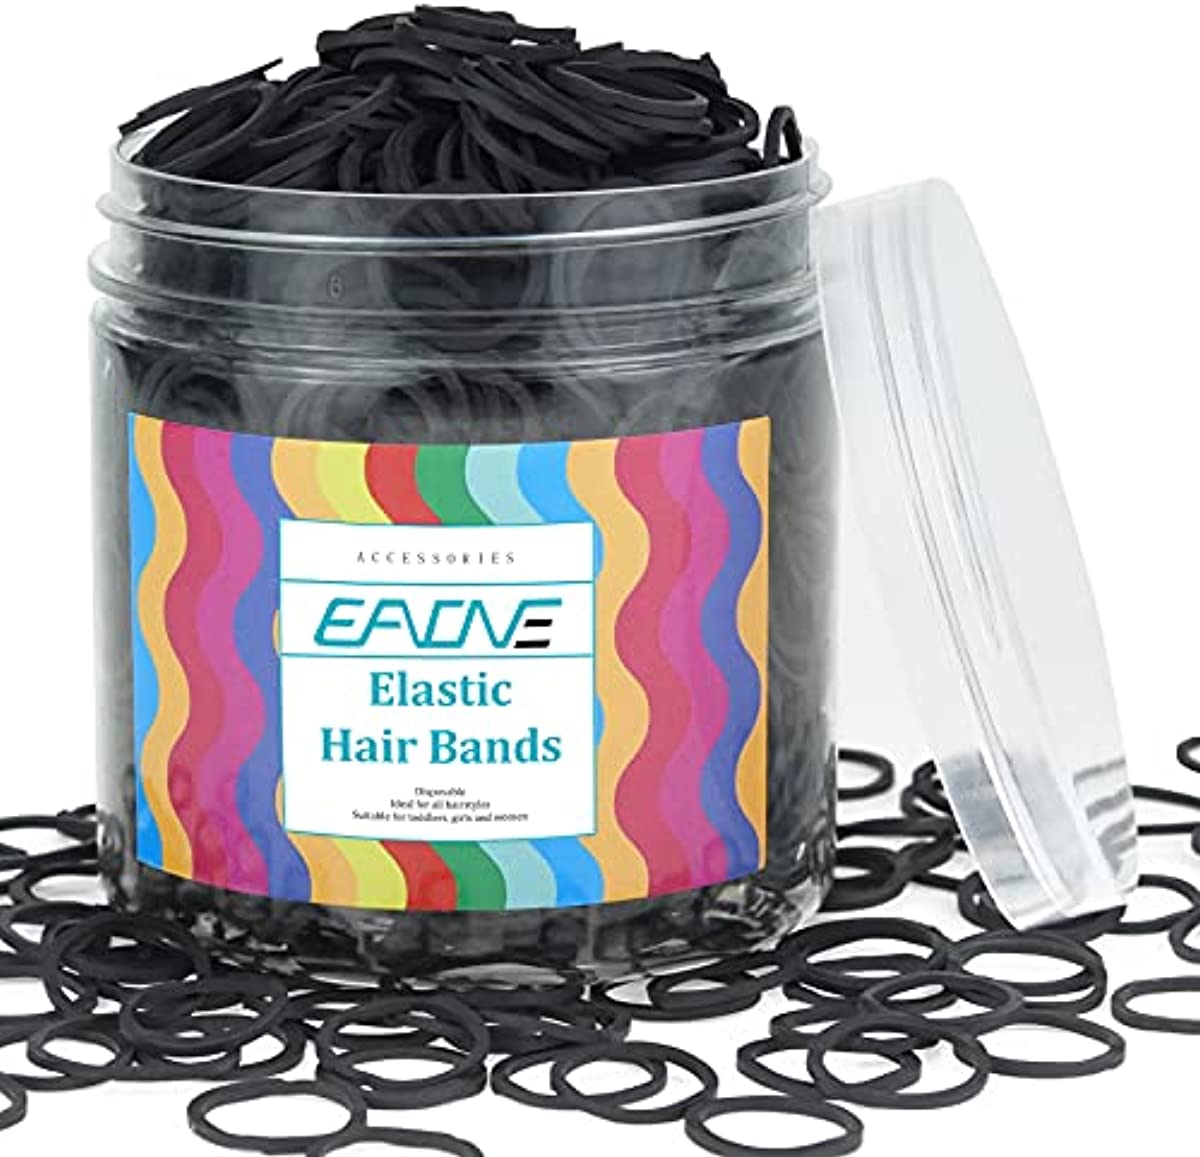 EAONE 1500Pcs Small Hair Bands Baby Hair Ties Tiny Elastics Rubber Bands for Girls and Women with Box Packaged, Black